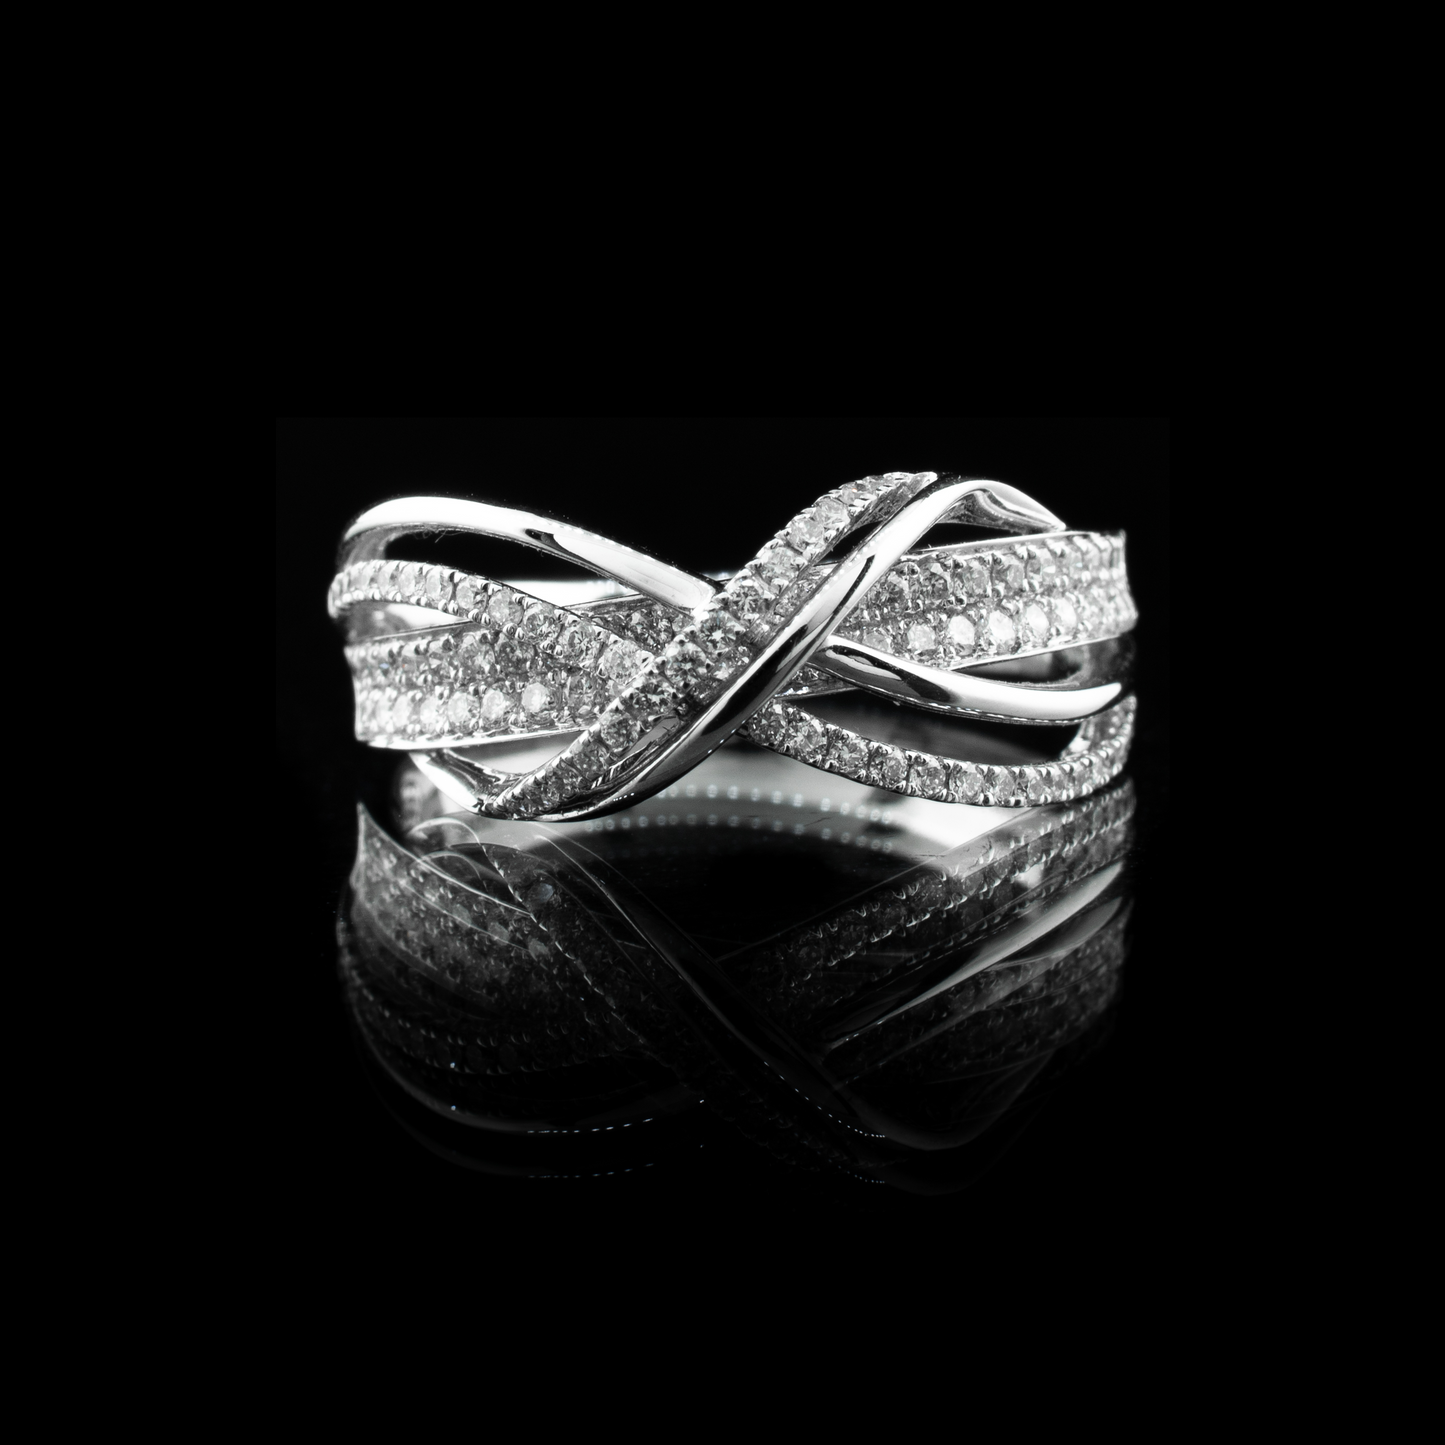 The Interlaced Infinity Ring